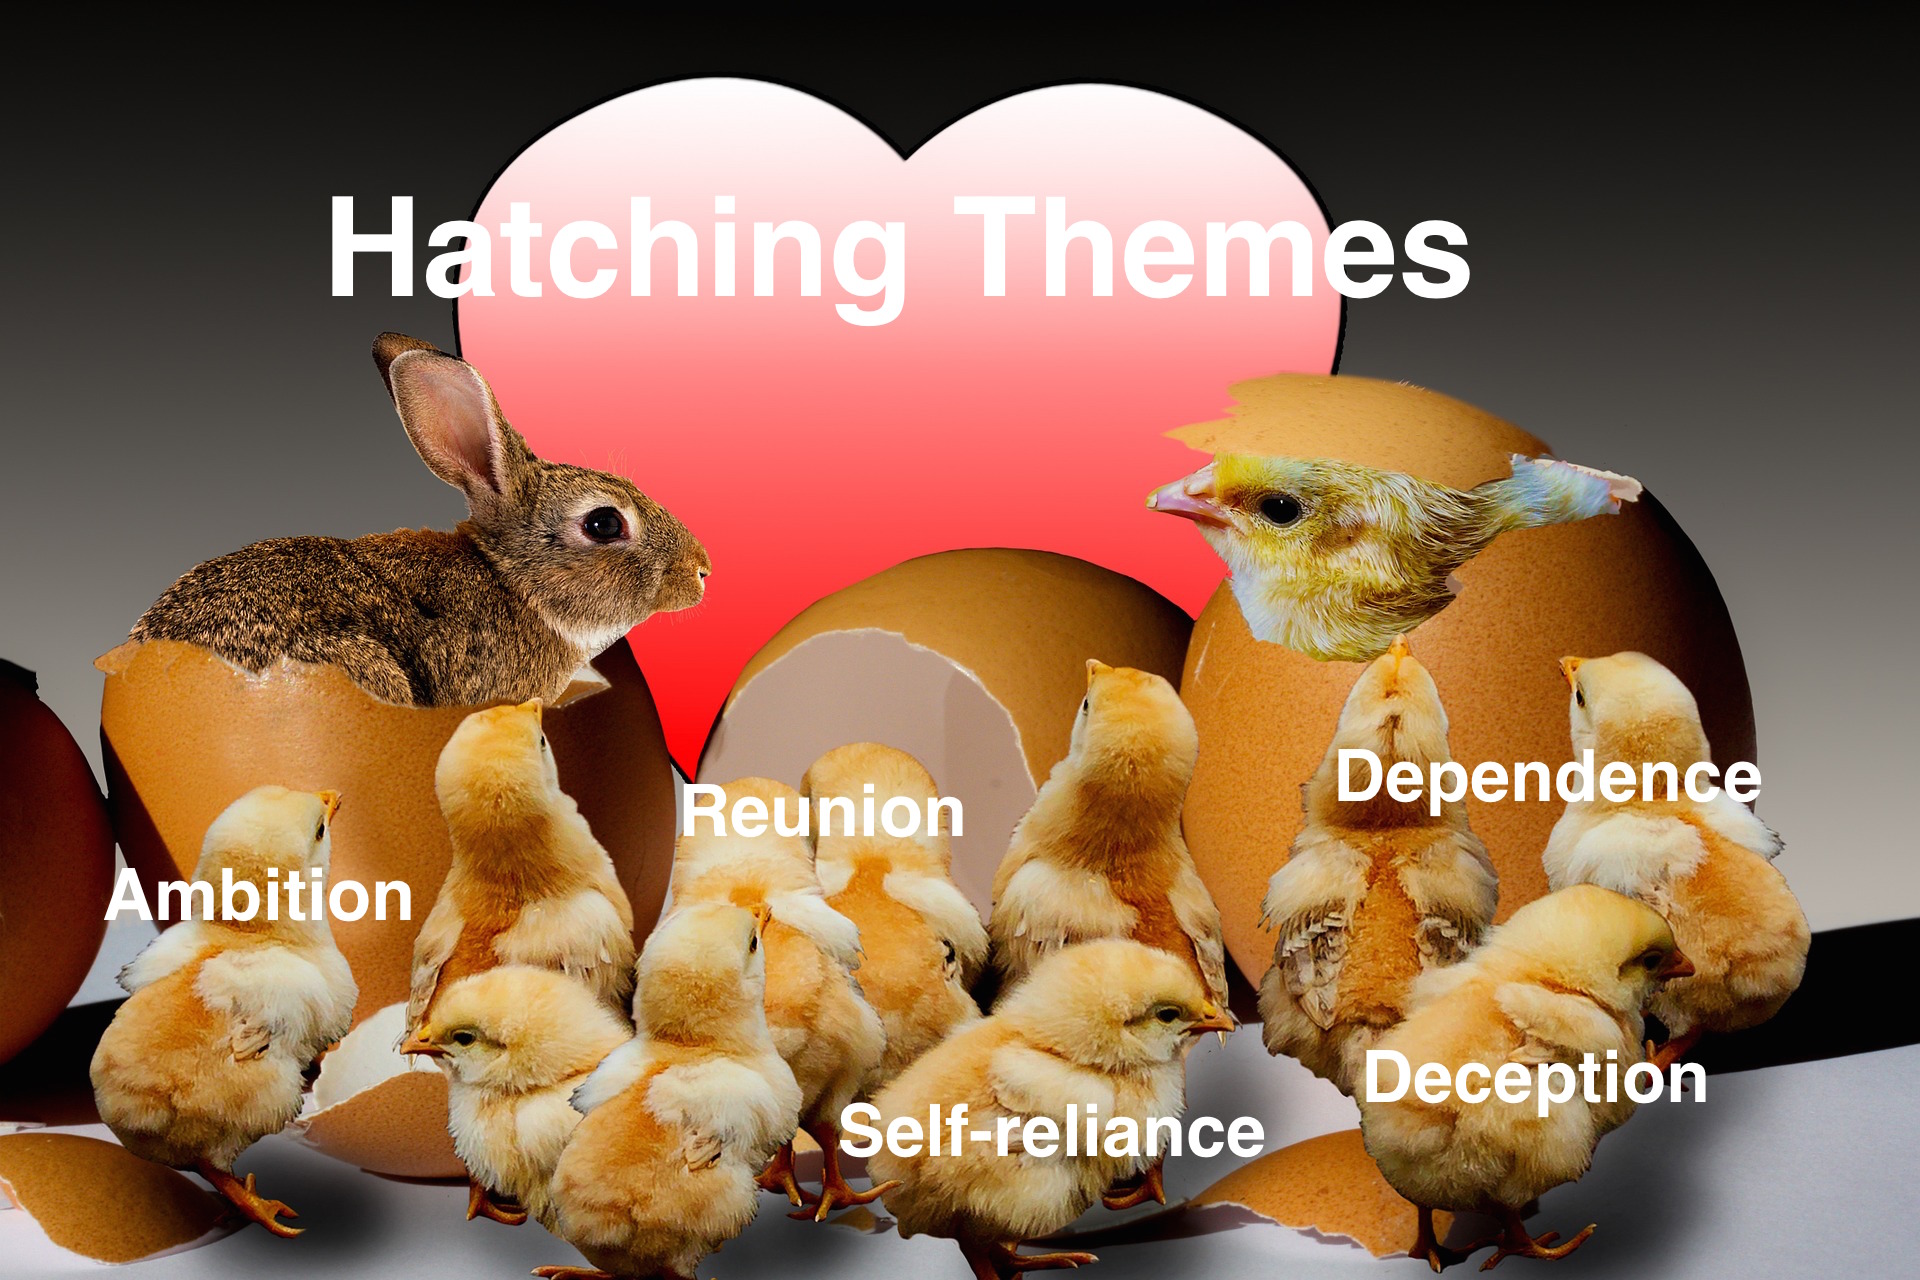 How to Hatch a Solid & Meaningful Theme For Your Story